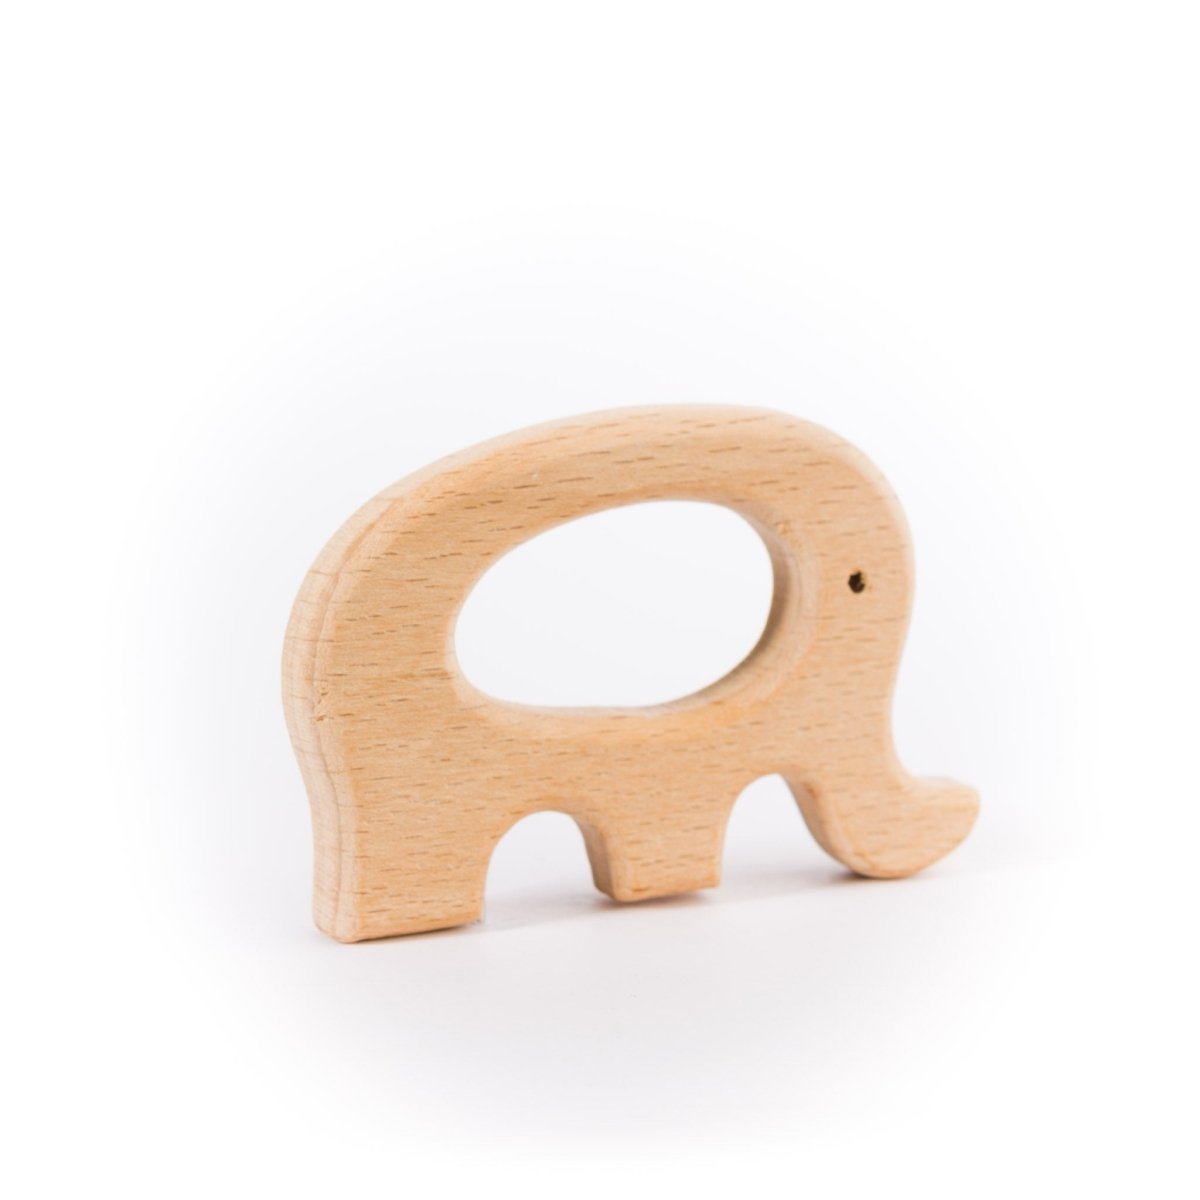 Wood Rings & Pendants Small - Beech Wood Elephant from Cara & Co Craft Supply